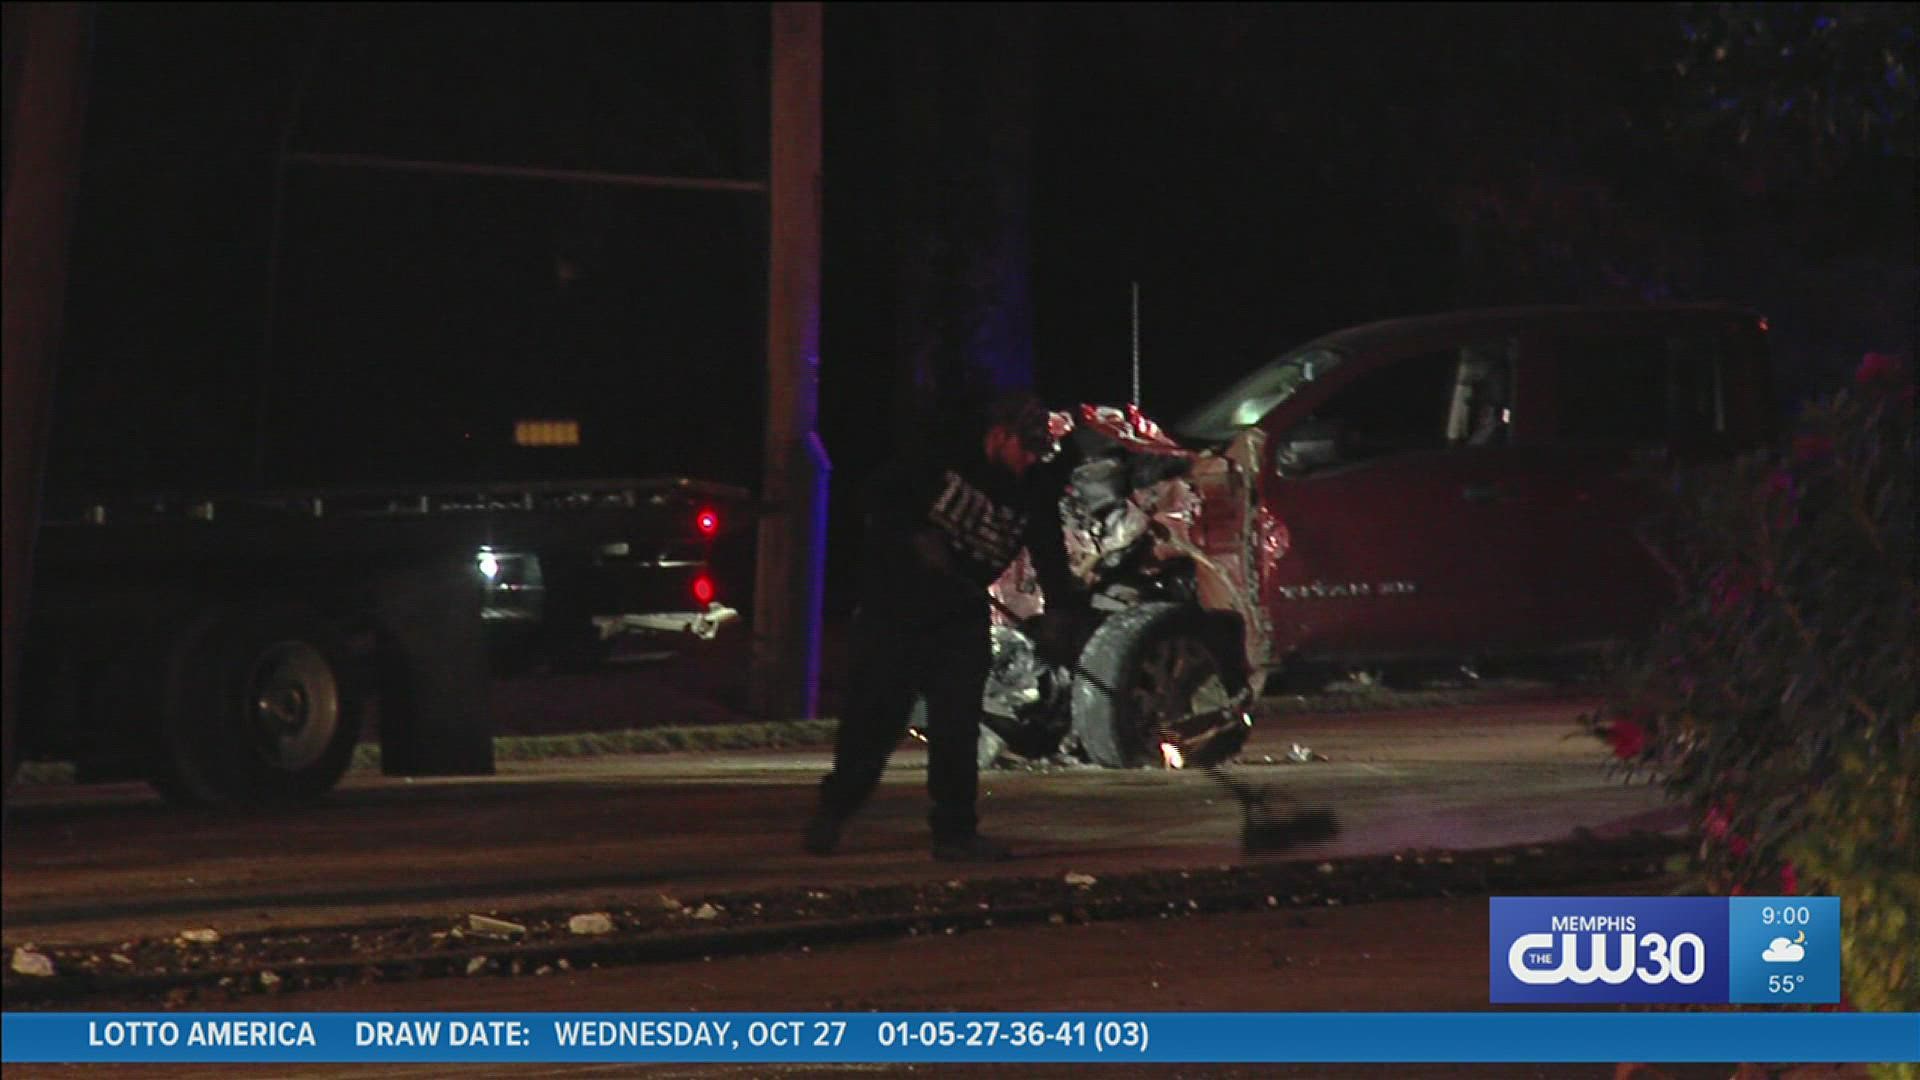 A pickup truck collided with a light pole Saturday night on New Byhalia Road in Collierville.